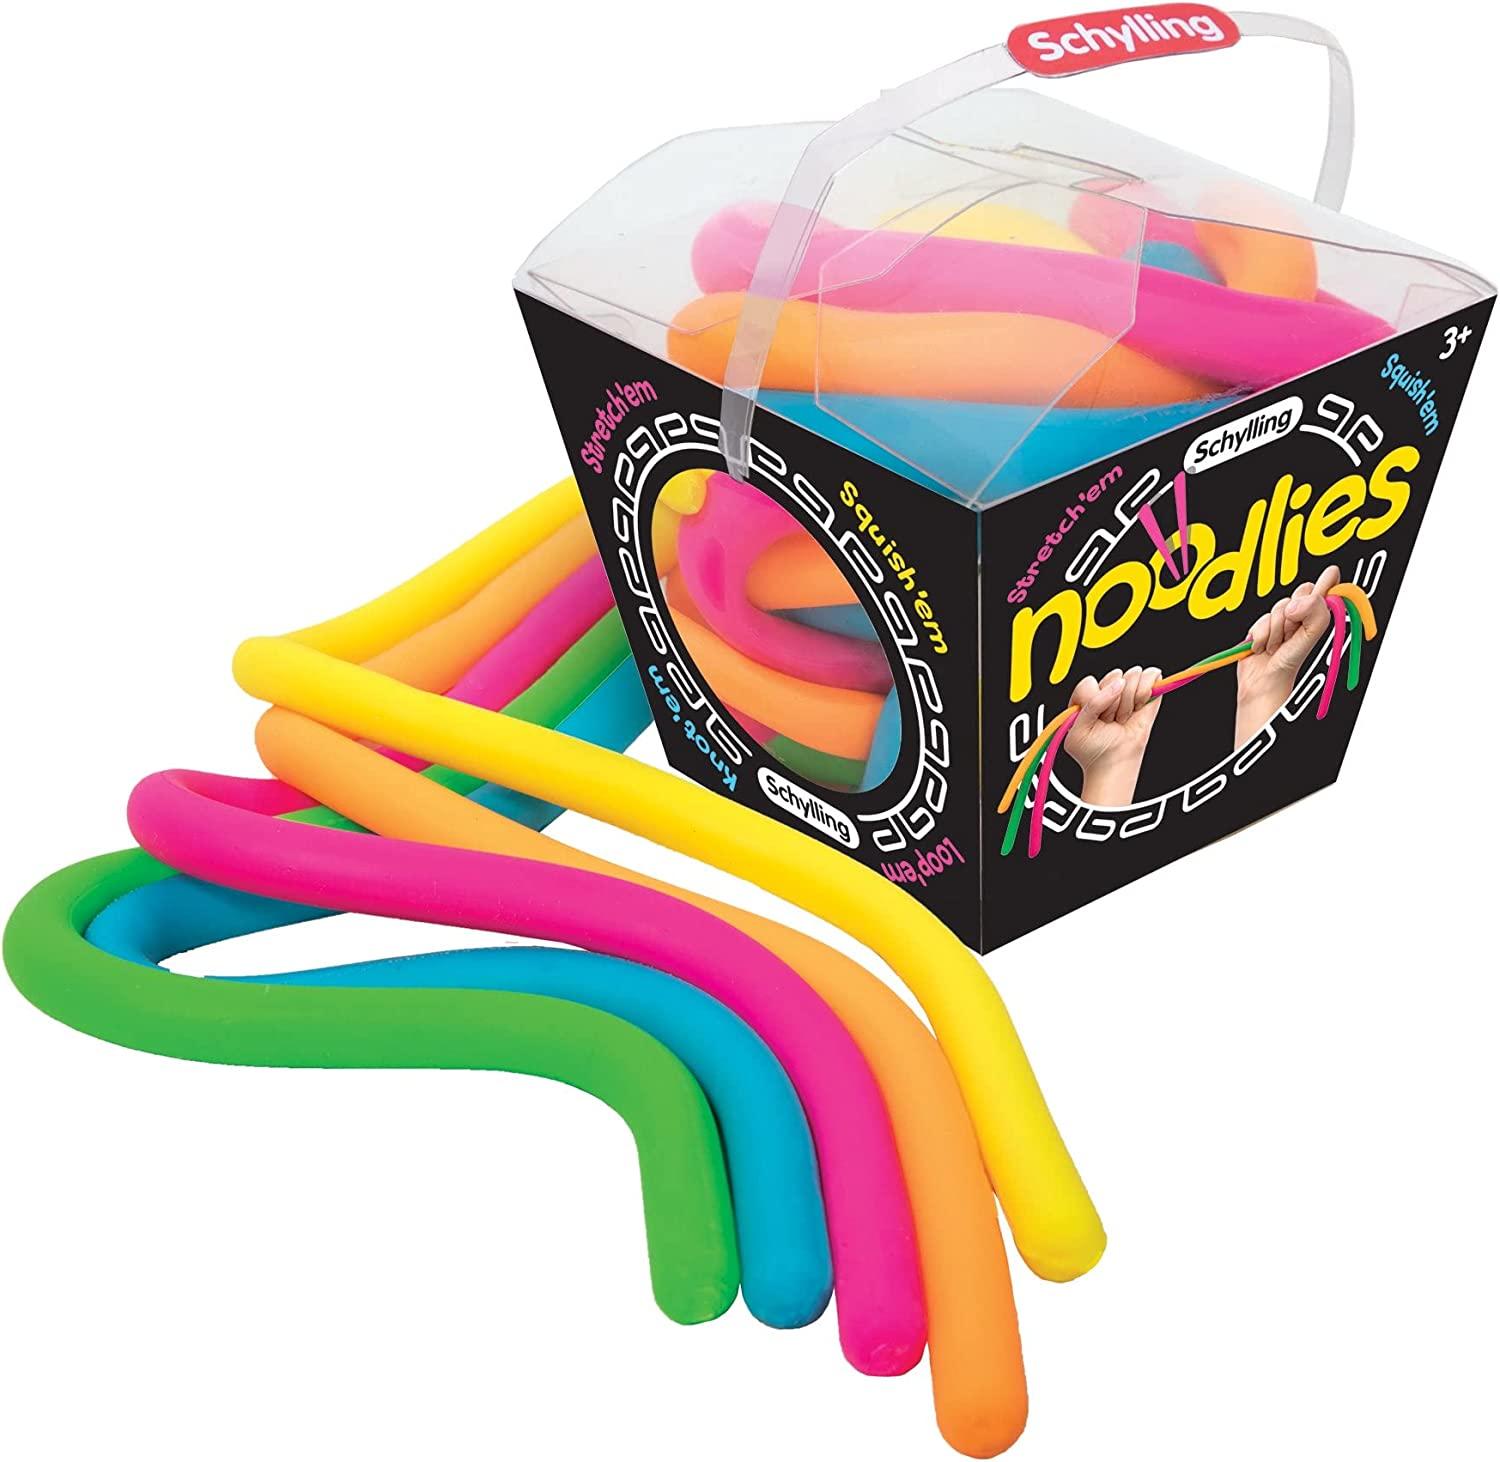 Brightly-coloured rubber noodles fidget toy.